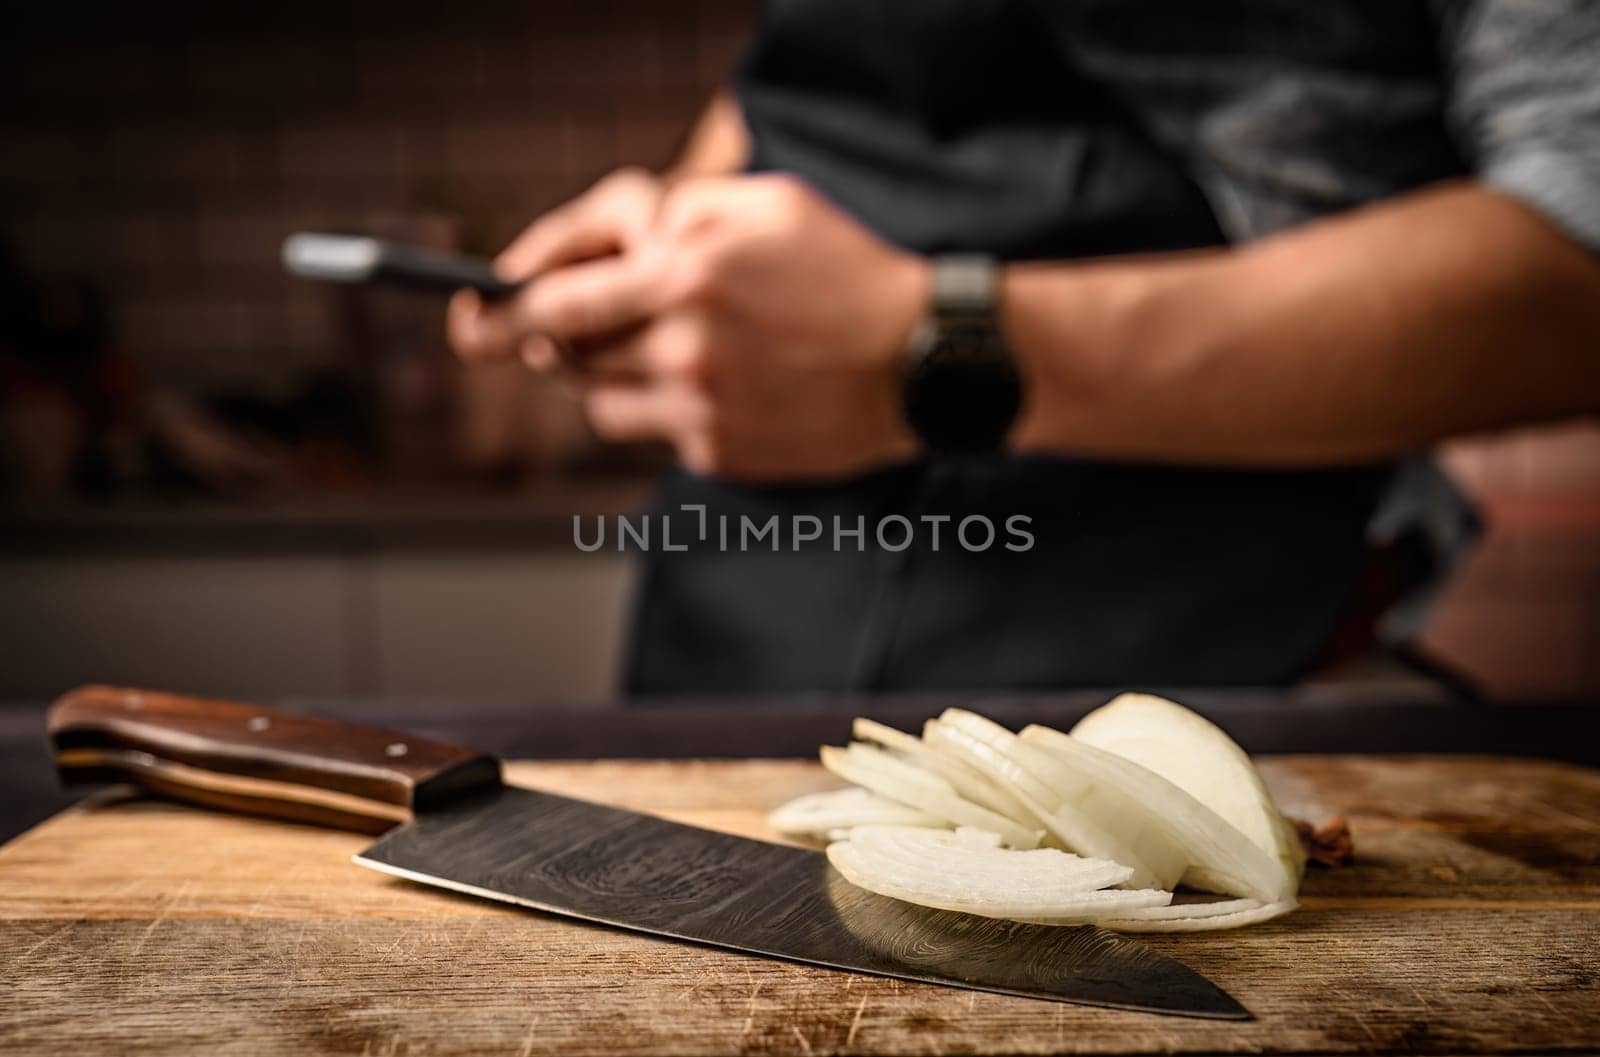 Chief hands holding smartphone at kitchen and sliced onion on wooden board. Man during cooking break with mobile cell phone and bitter vegetable